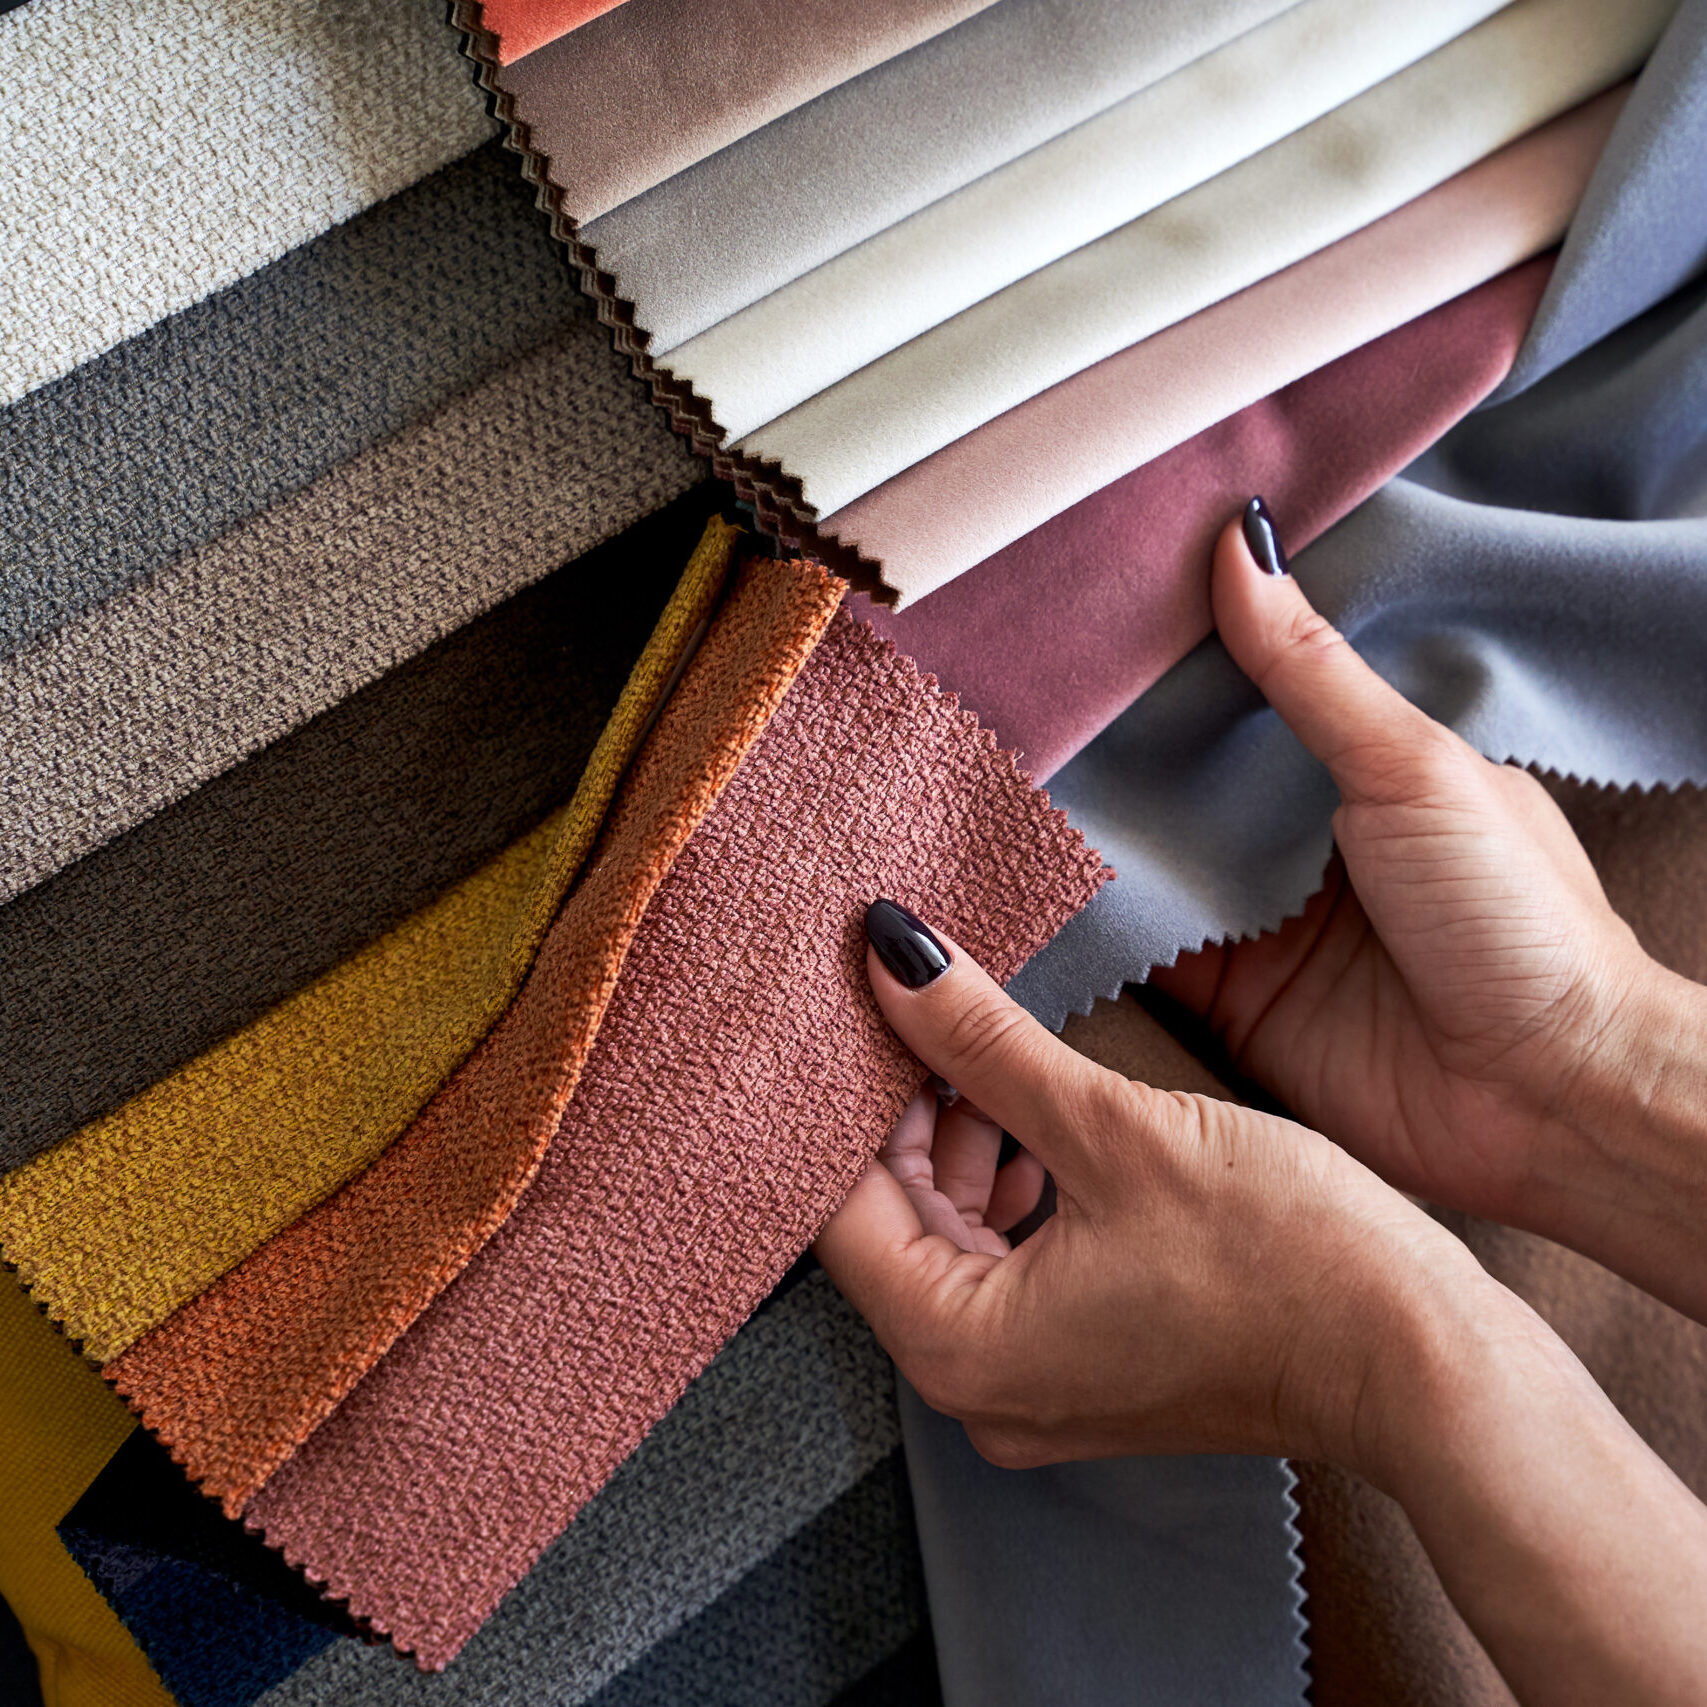 Choosing,Upholstery,Fabric,Color,And,Texture,From,Various,Colorful,Samples